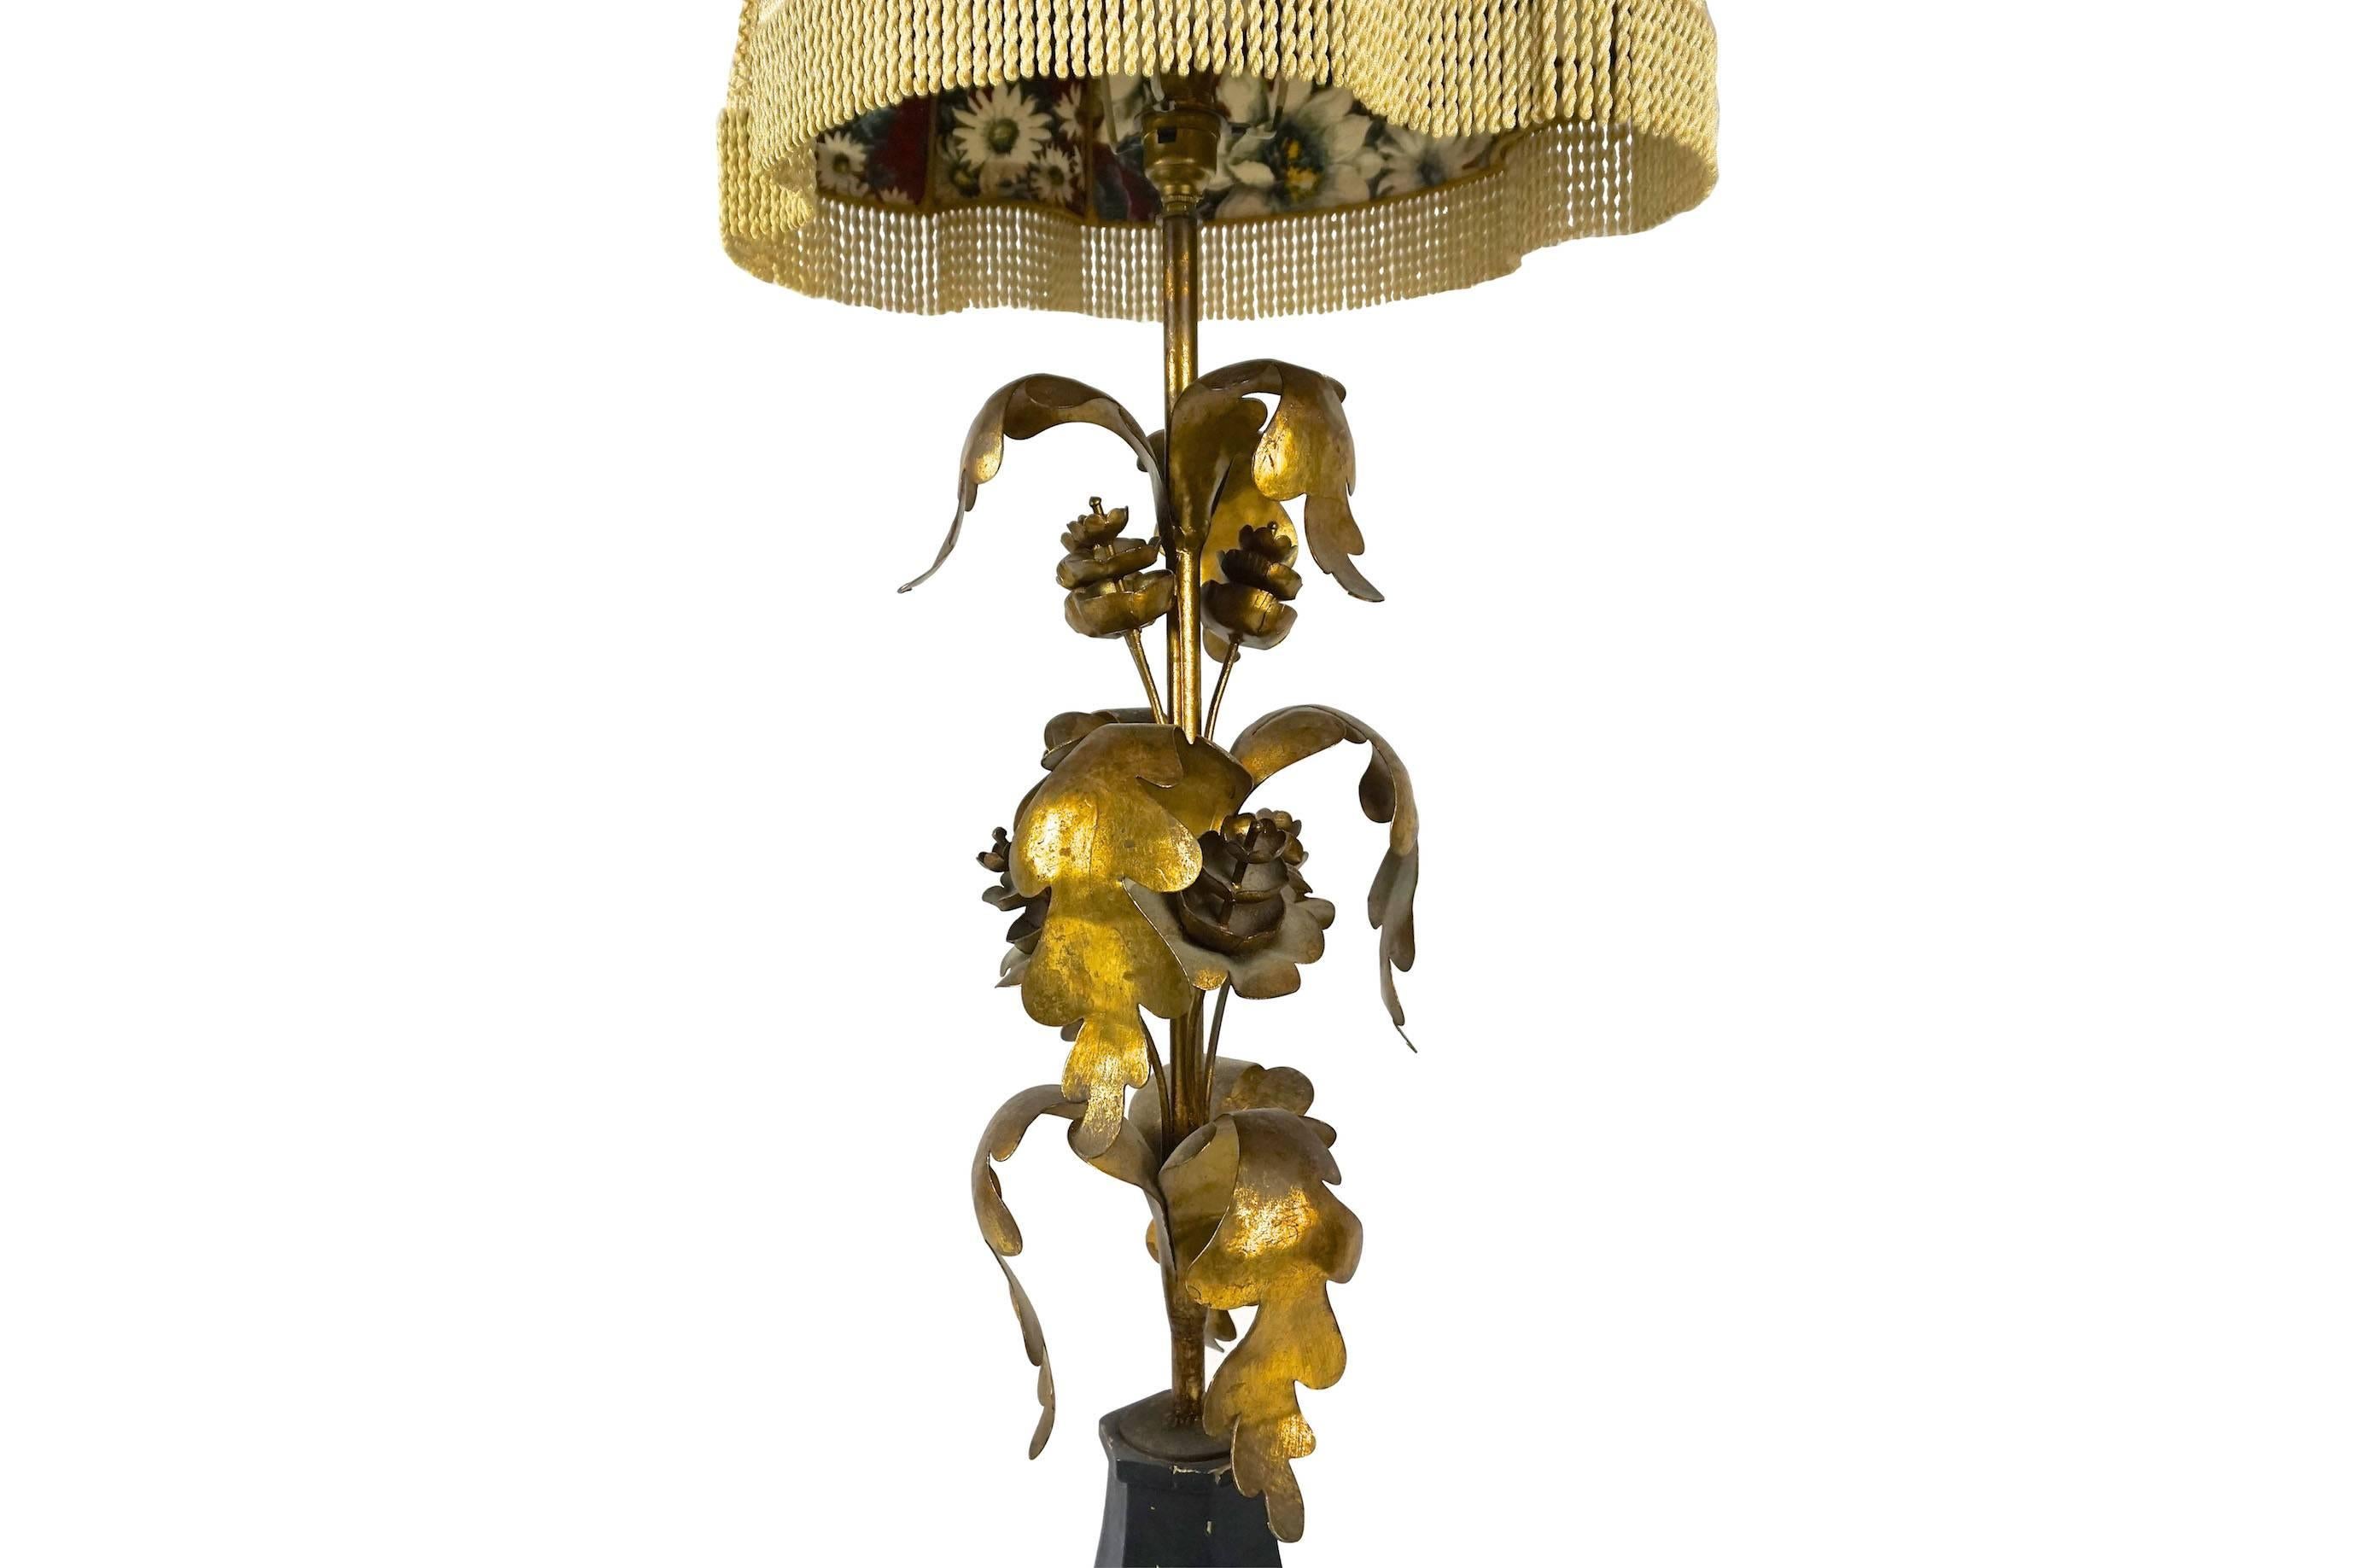 Vintage Italian floral print fringed shade tole gilt Hollywood Regency table lamp.

Lamp dimensions: H 72 x W 20 x D 20 cm.
Lamp shade dimensions: H 30cm, upper W 33 x D 24, lower W 42 x D 35 cm.